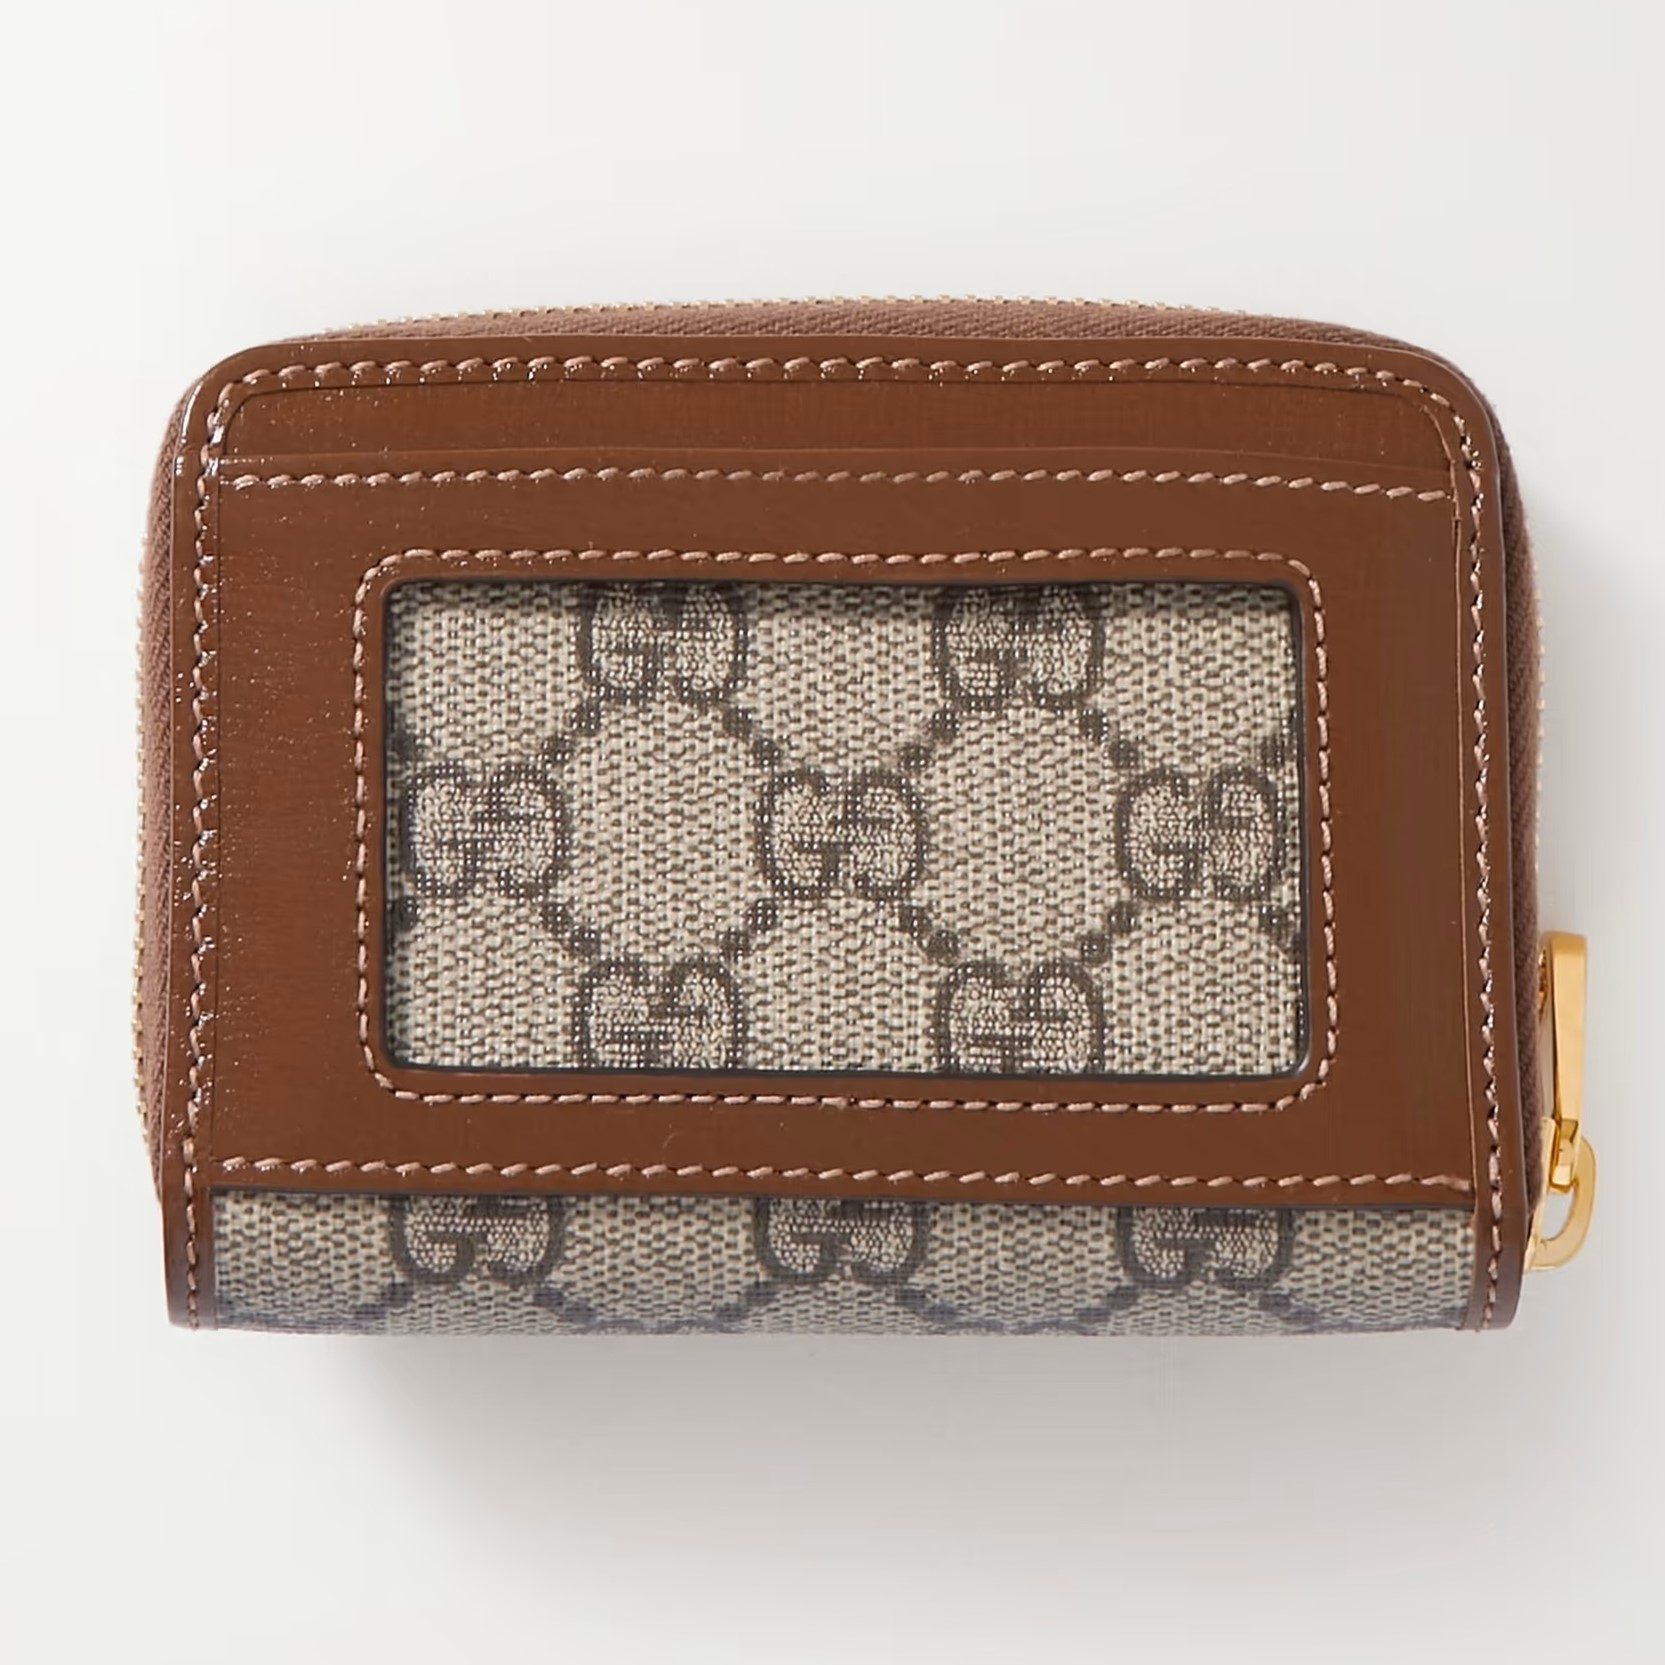 VÍ NGẮN NỮ GUCCI HORSEBIT 1955 SMALL BROWN LEATHER TRIMMED PRINTED COATED CANVAS CARDHOLDER 5